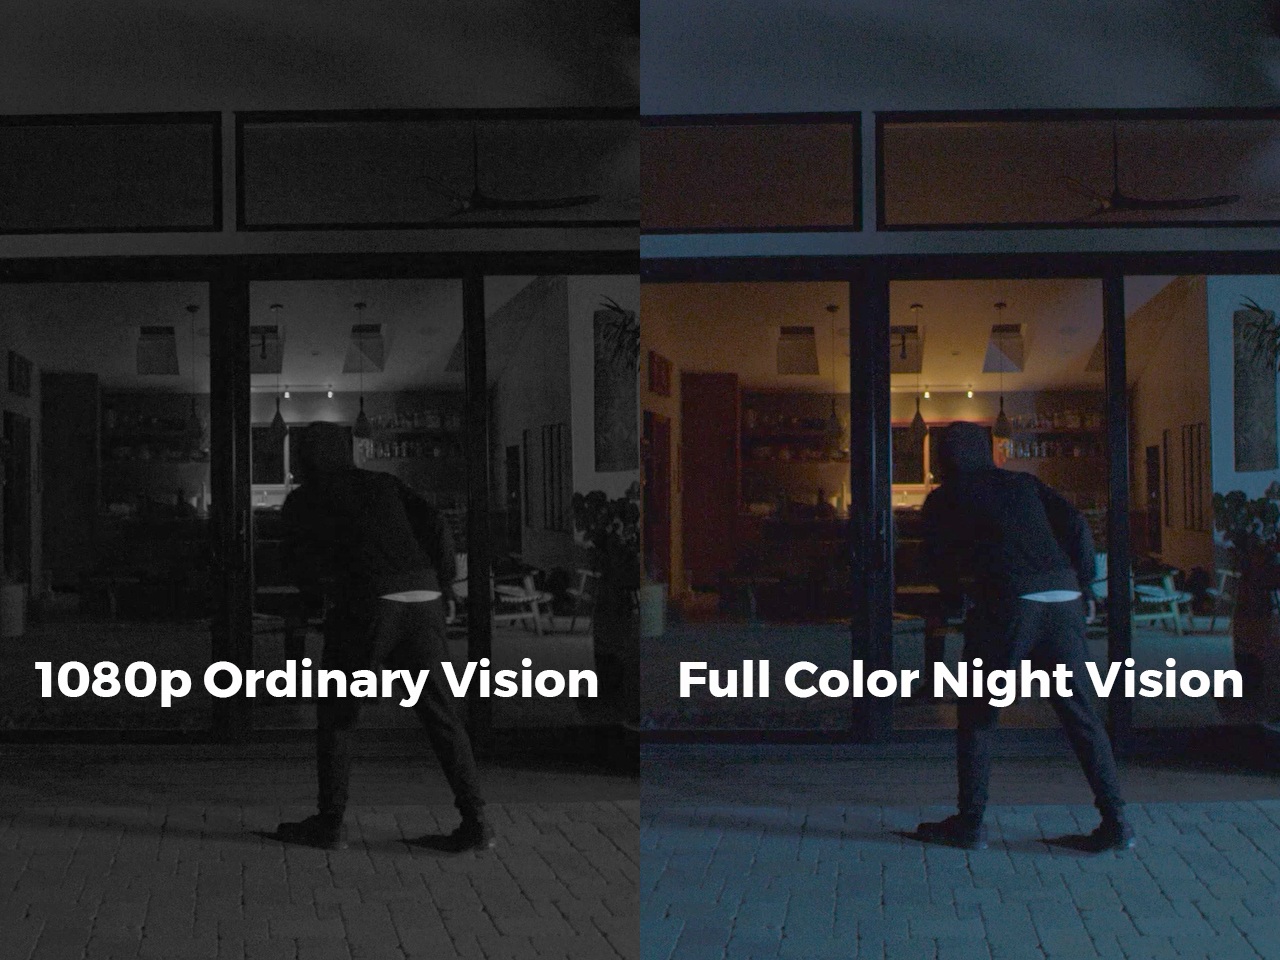 At night, the world doesn’t turn black and white. Simply turn on the spotlight to enable night vision in vibrant colors. You can adjust the brightness through the APP.